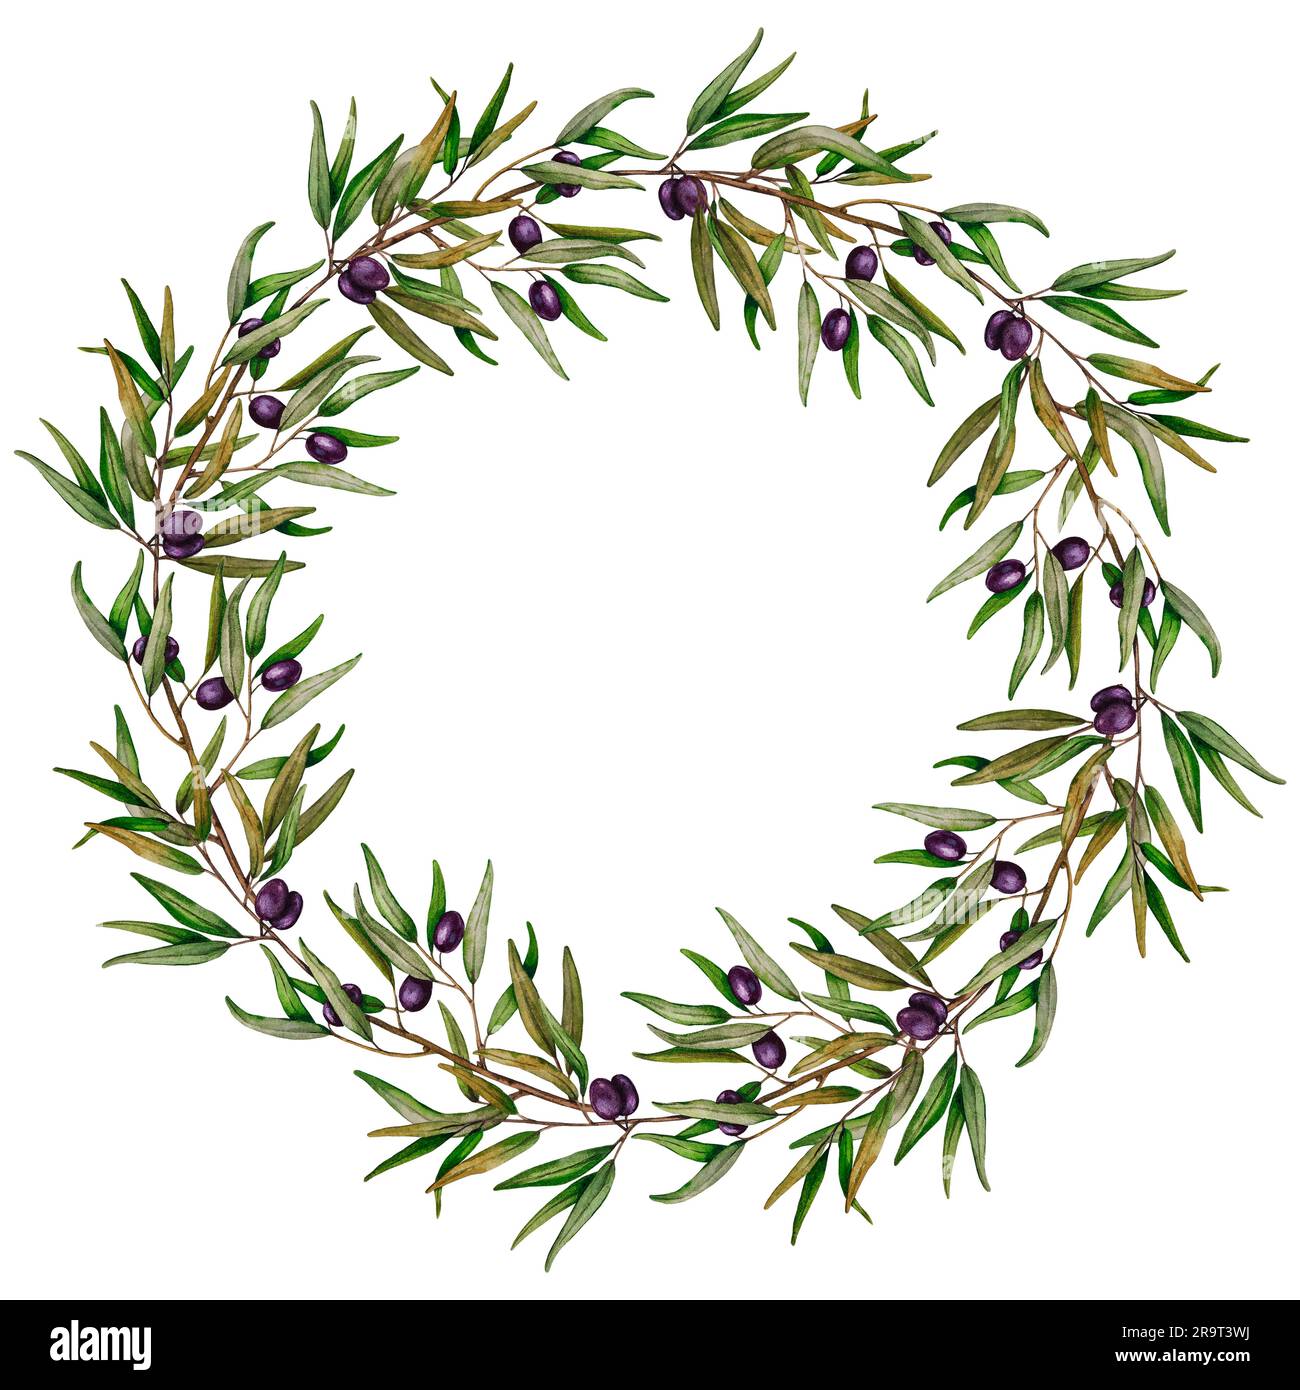 Watercolor green olive branch set. Hand painted floral illustration with  olive fruit and tree branches with leaves isolatedon white background. For  design, print and fabric. ilustração do Stock